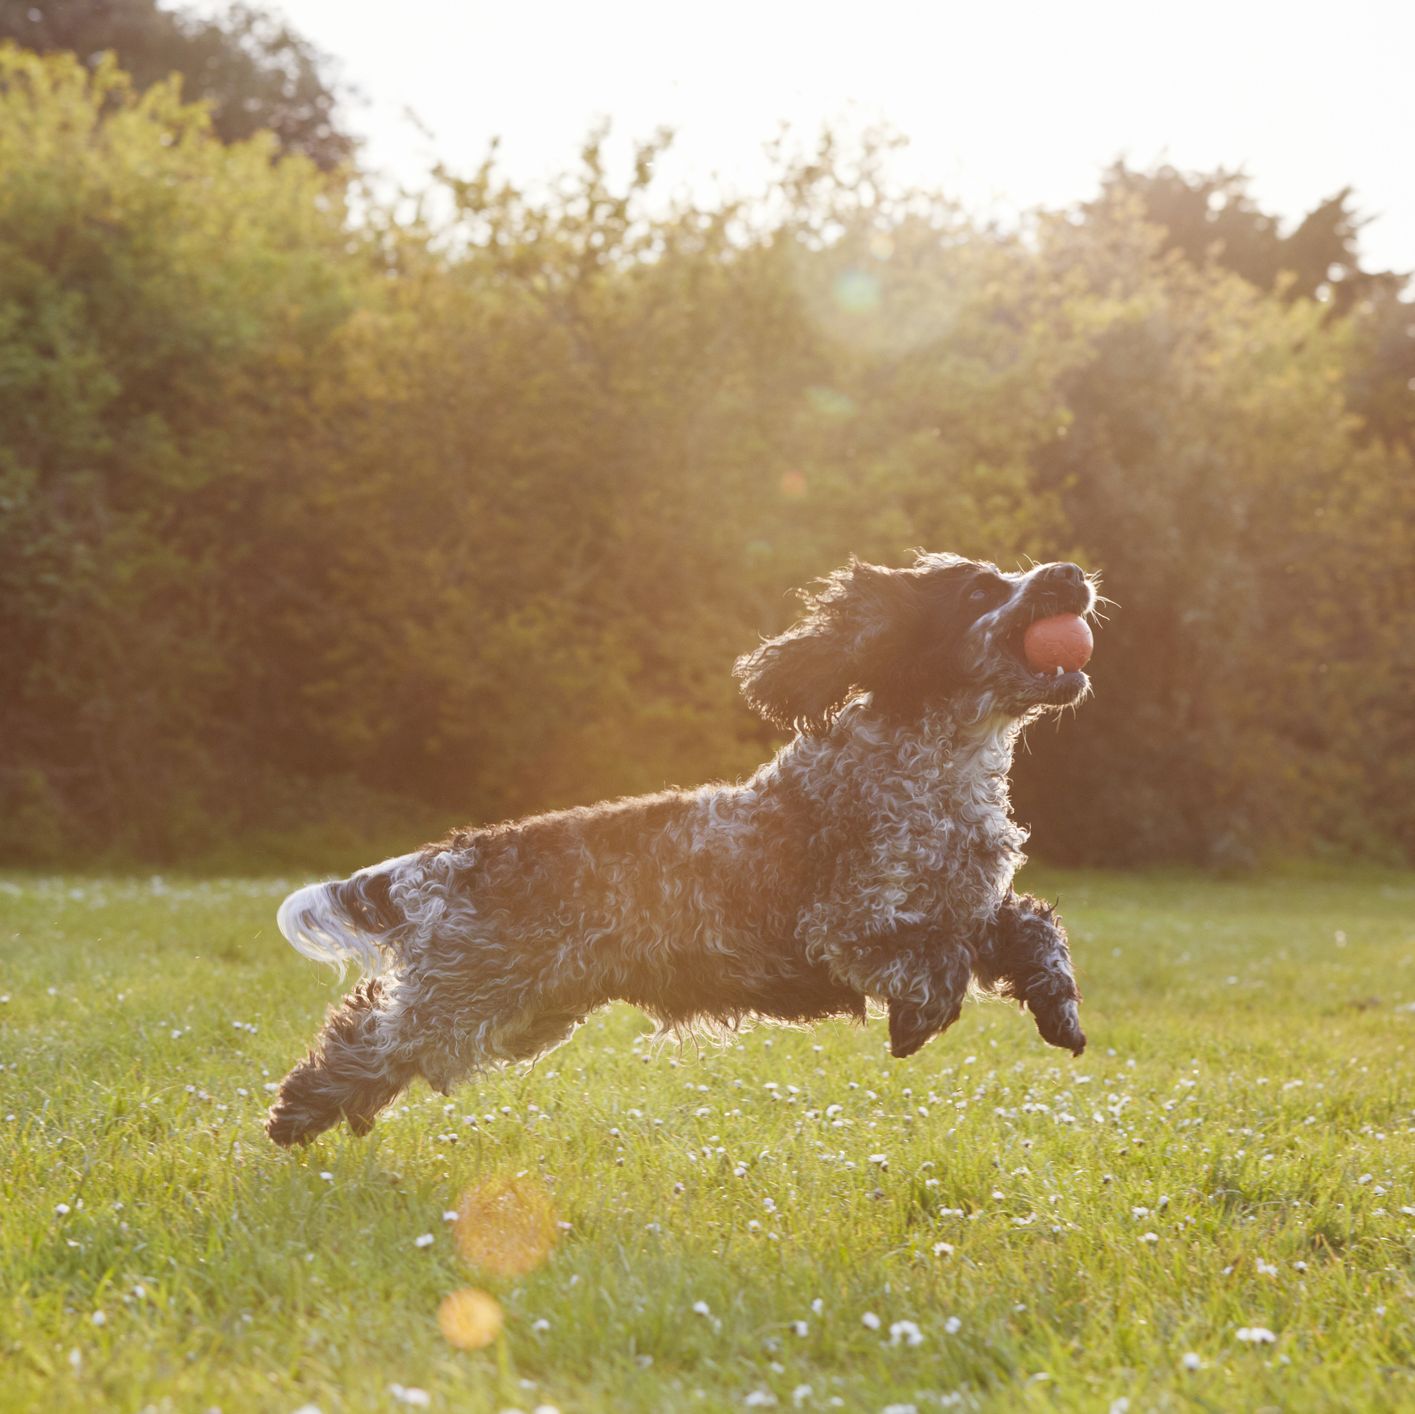 https://hips.hearstapps.com/hmg-prod/images/spaniel-running-with-ball-in-park-at-sunset-royalty-free-image-1626421098.jpg?crop=0.667xw:1.00xh;0.183xw,0&resize=2048:*